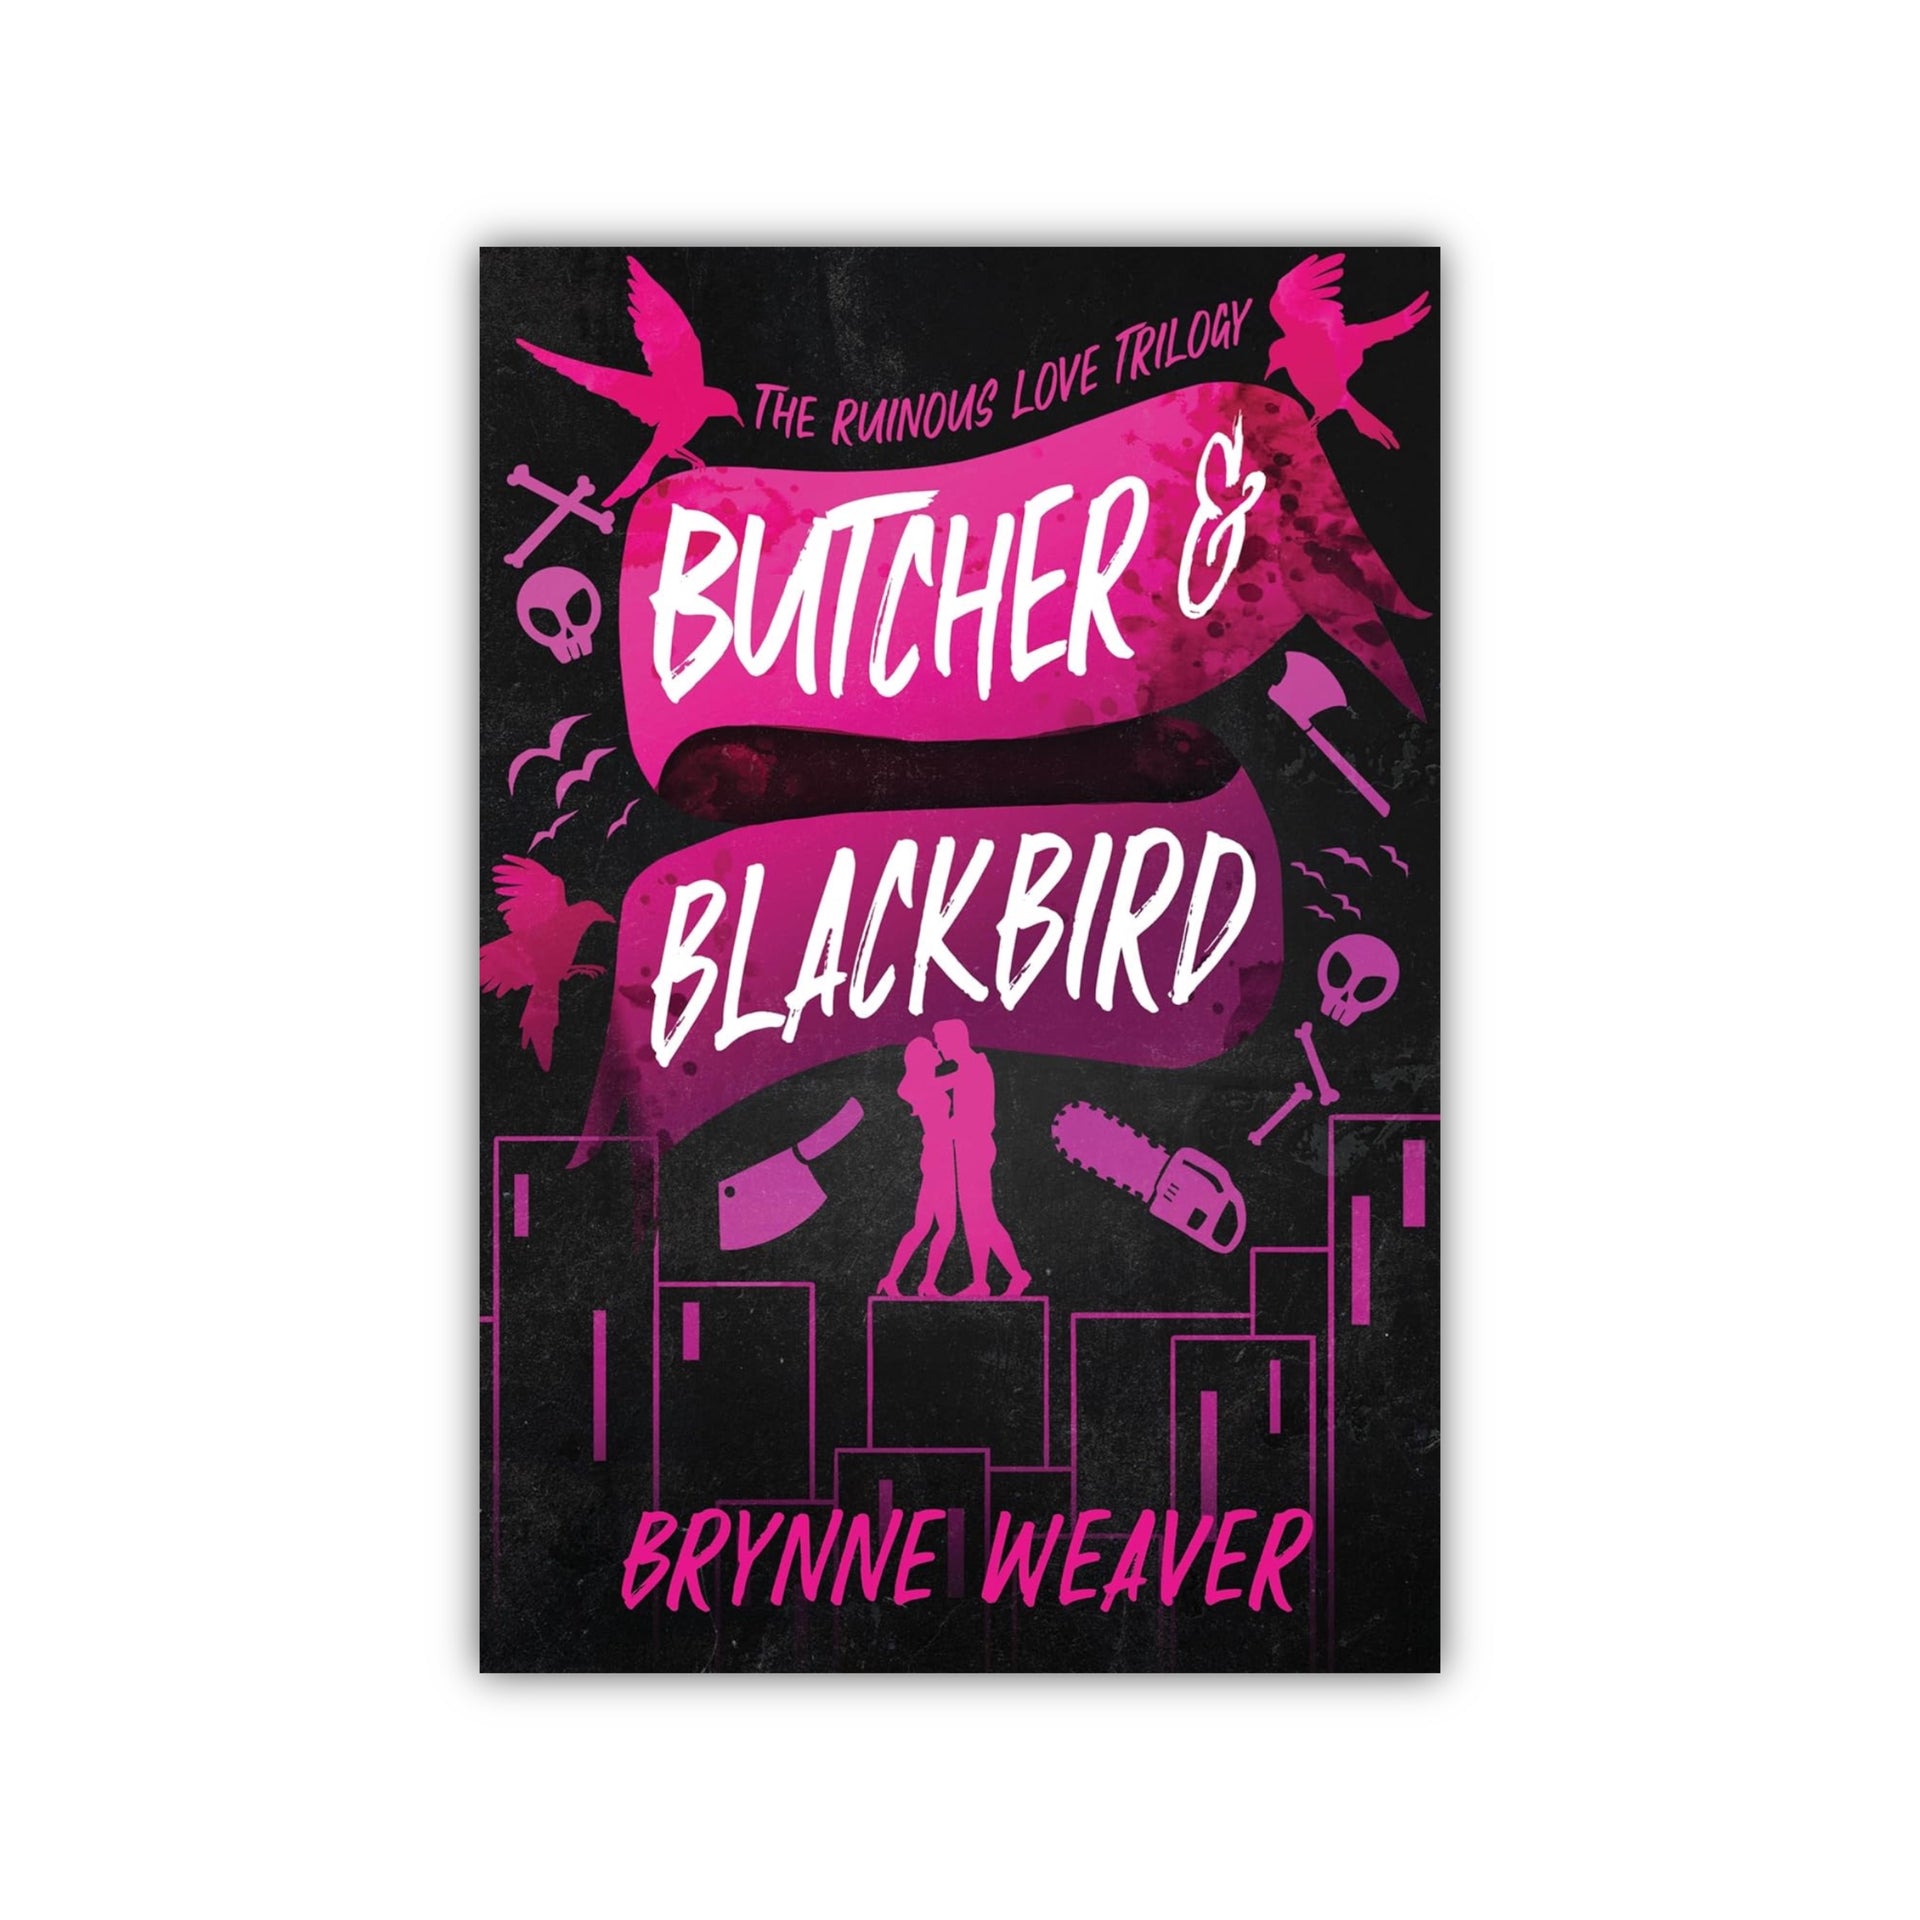 Brynne Weaver on Instagram: 🪓Butcher & Blackbird teasers🪓 Rowan takes  *touch her and die* vibes to new levels 😏. These teasers are from a VERY  dark, very fun scene that I had